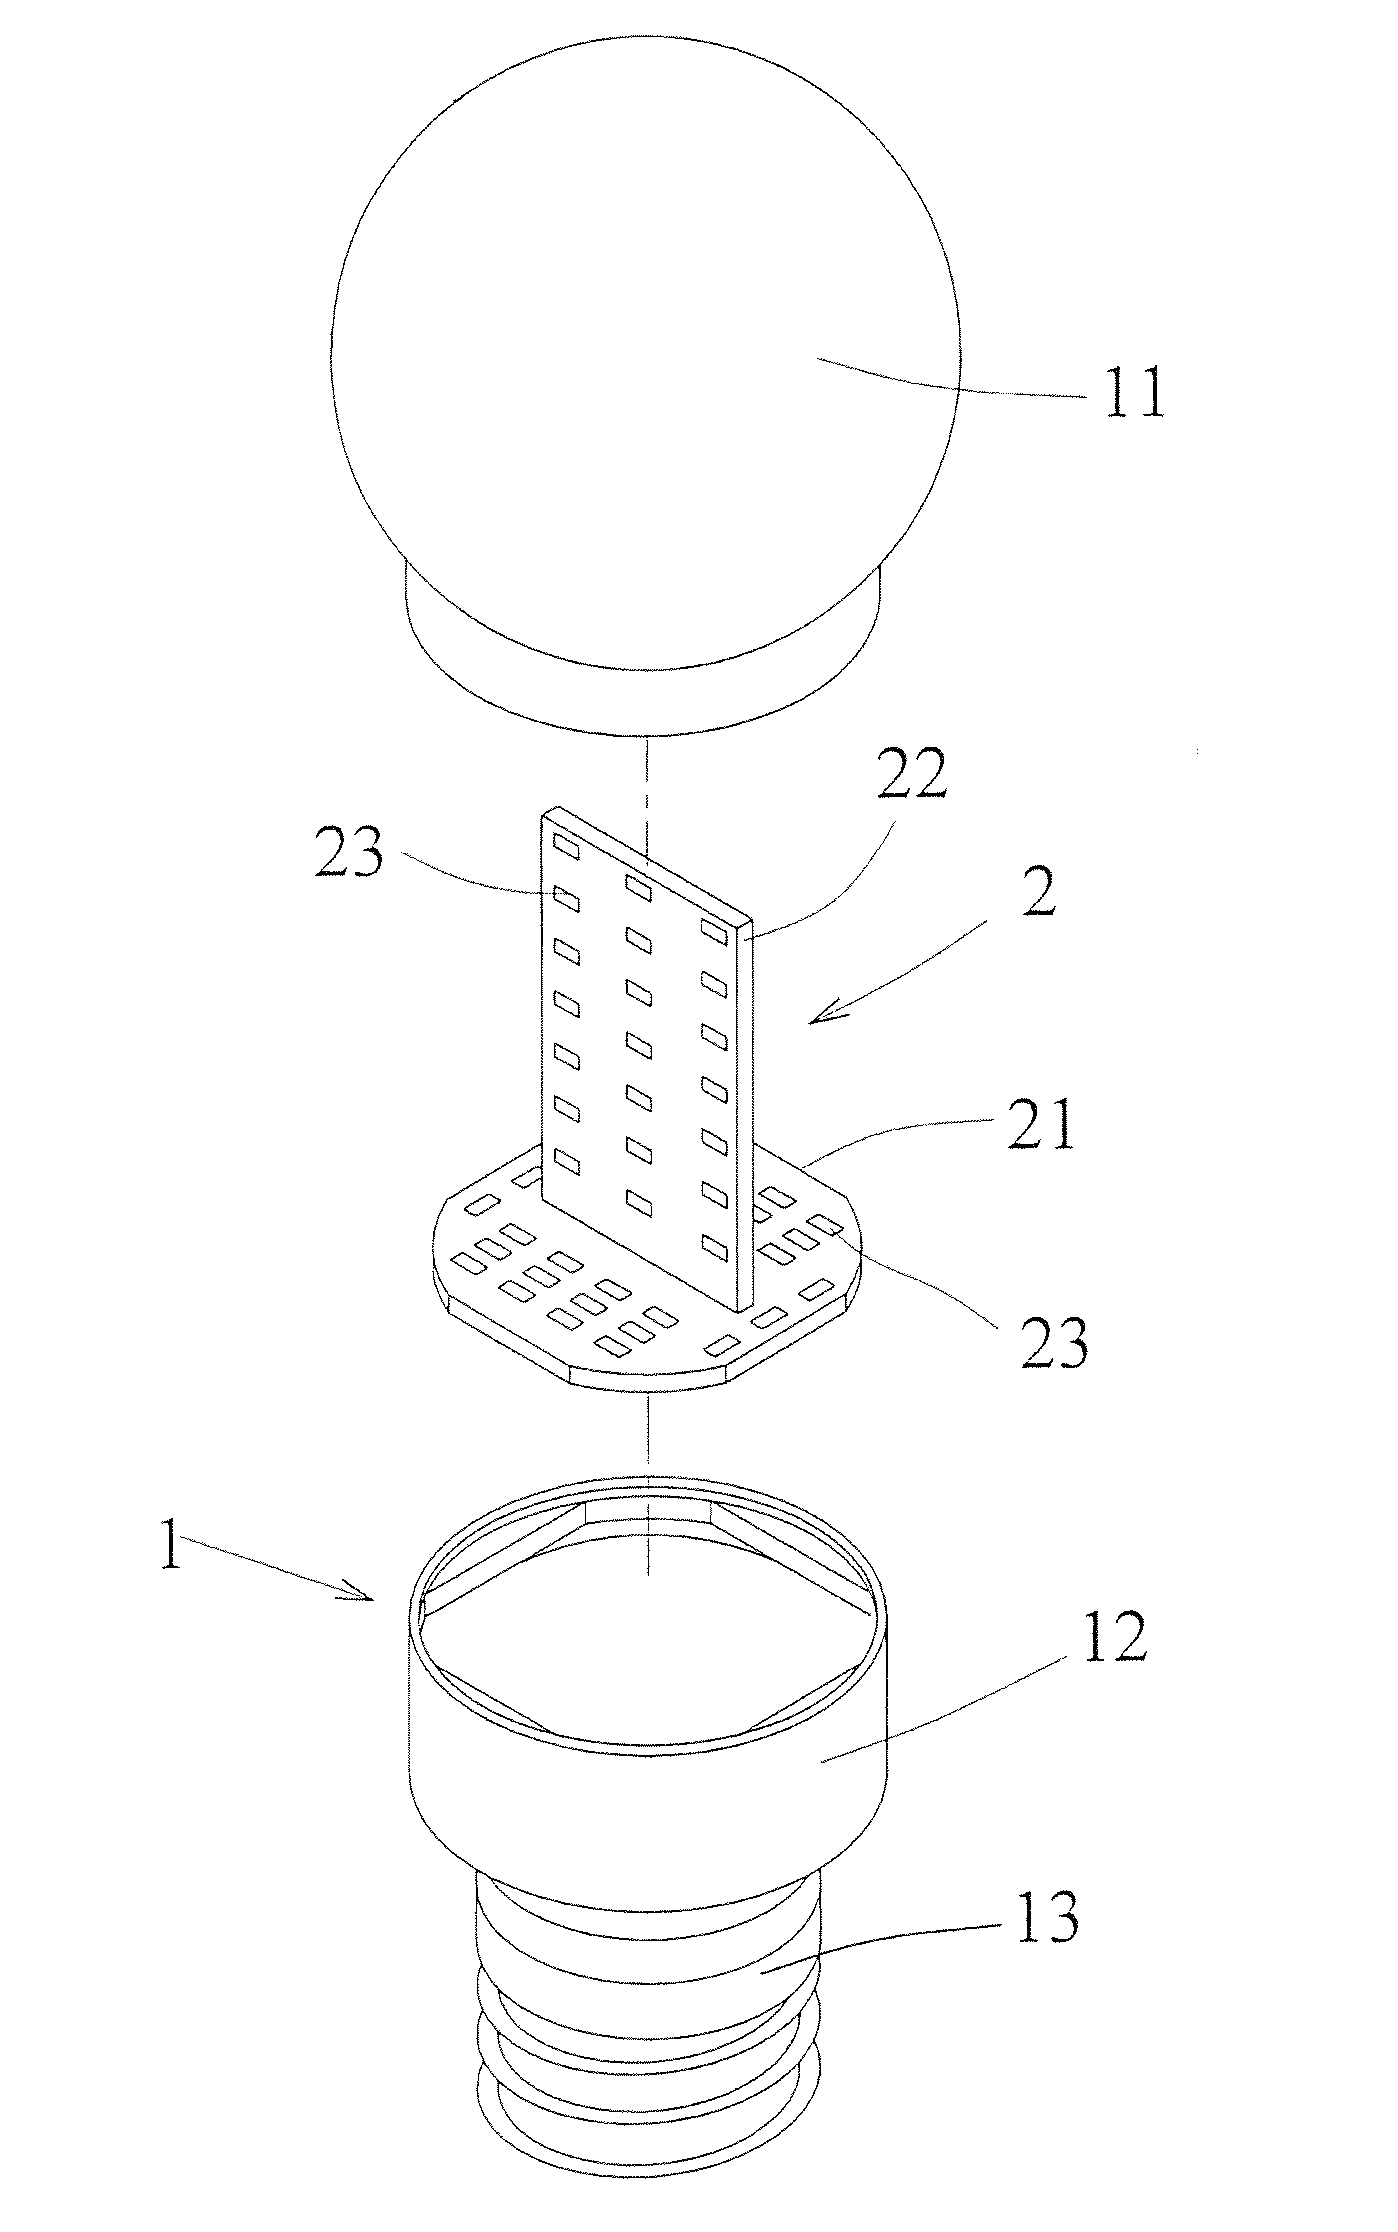 Light bulb having light emitting diodes connected to at least two circuit boards